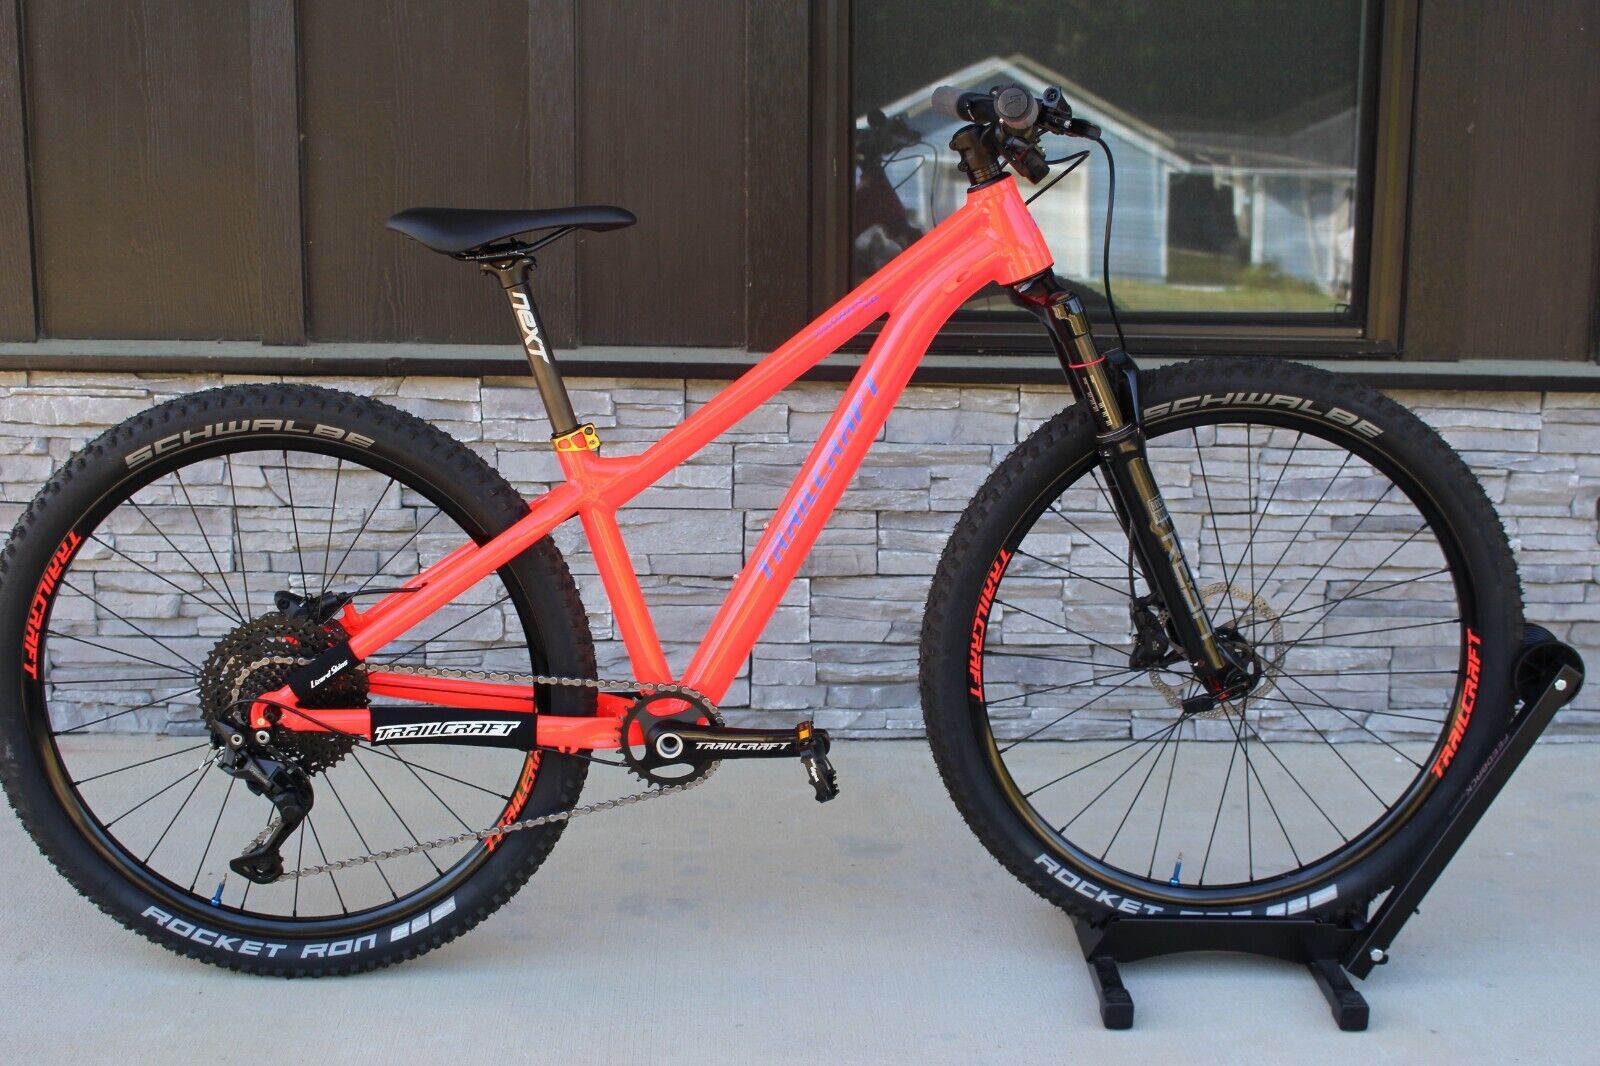 Small - 2022 Trailcraft Timber 26- Pro Build- $2,000 Retail - INV 817